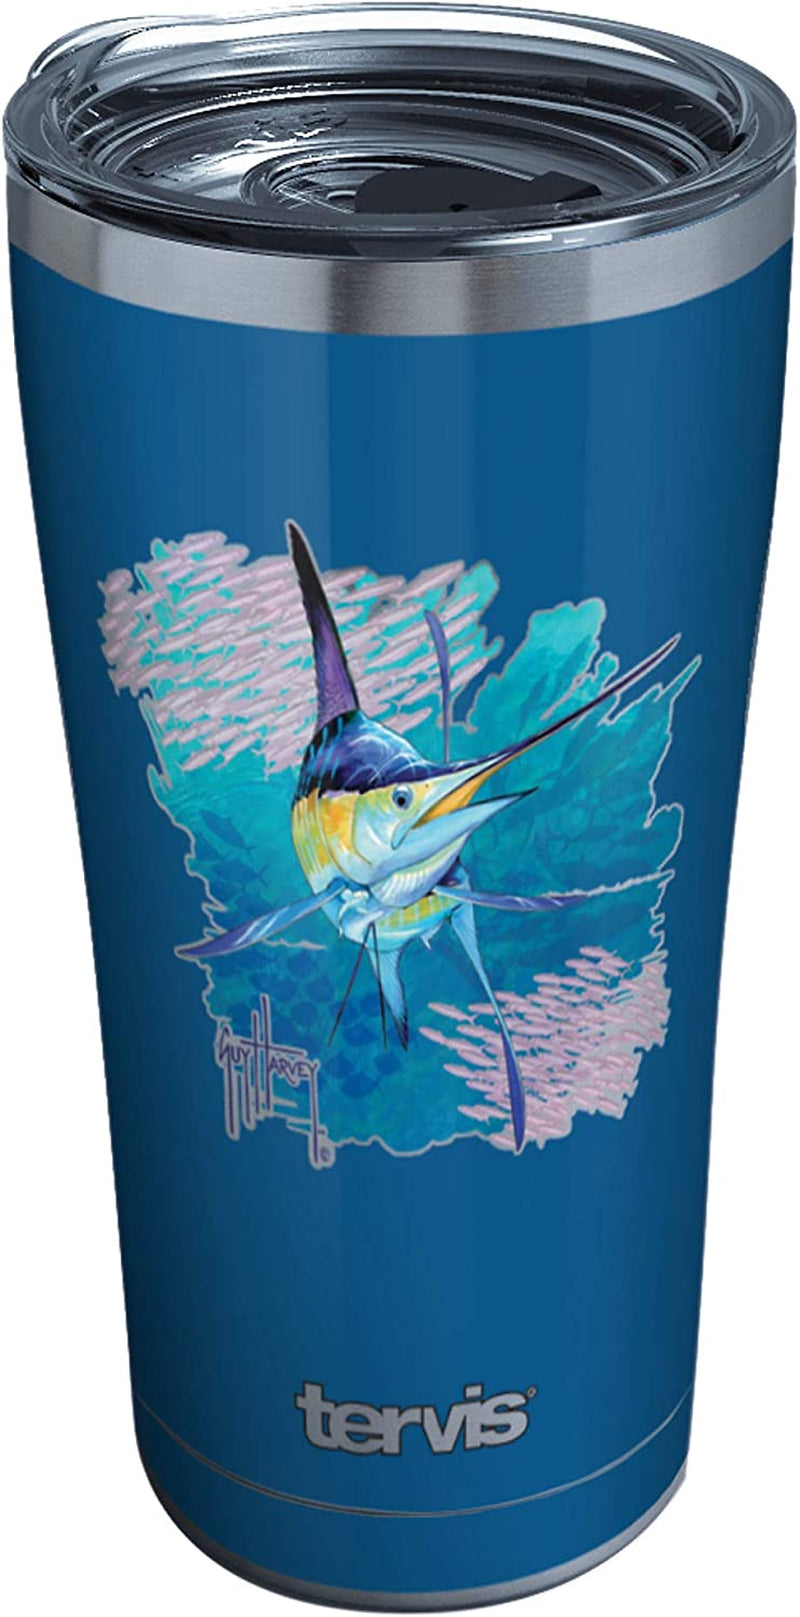 Tervis Made in USA Double Walled Guy Harvey - Offshore Haul Marlin Insulated Tumbler Cup Keeps Drinks Cold & Hot, 16Oz Mug, Classic Home & Garden > Kitchen & Dining > Tableware > Drinkware Tervis Stainless Steel 20oz 